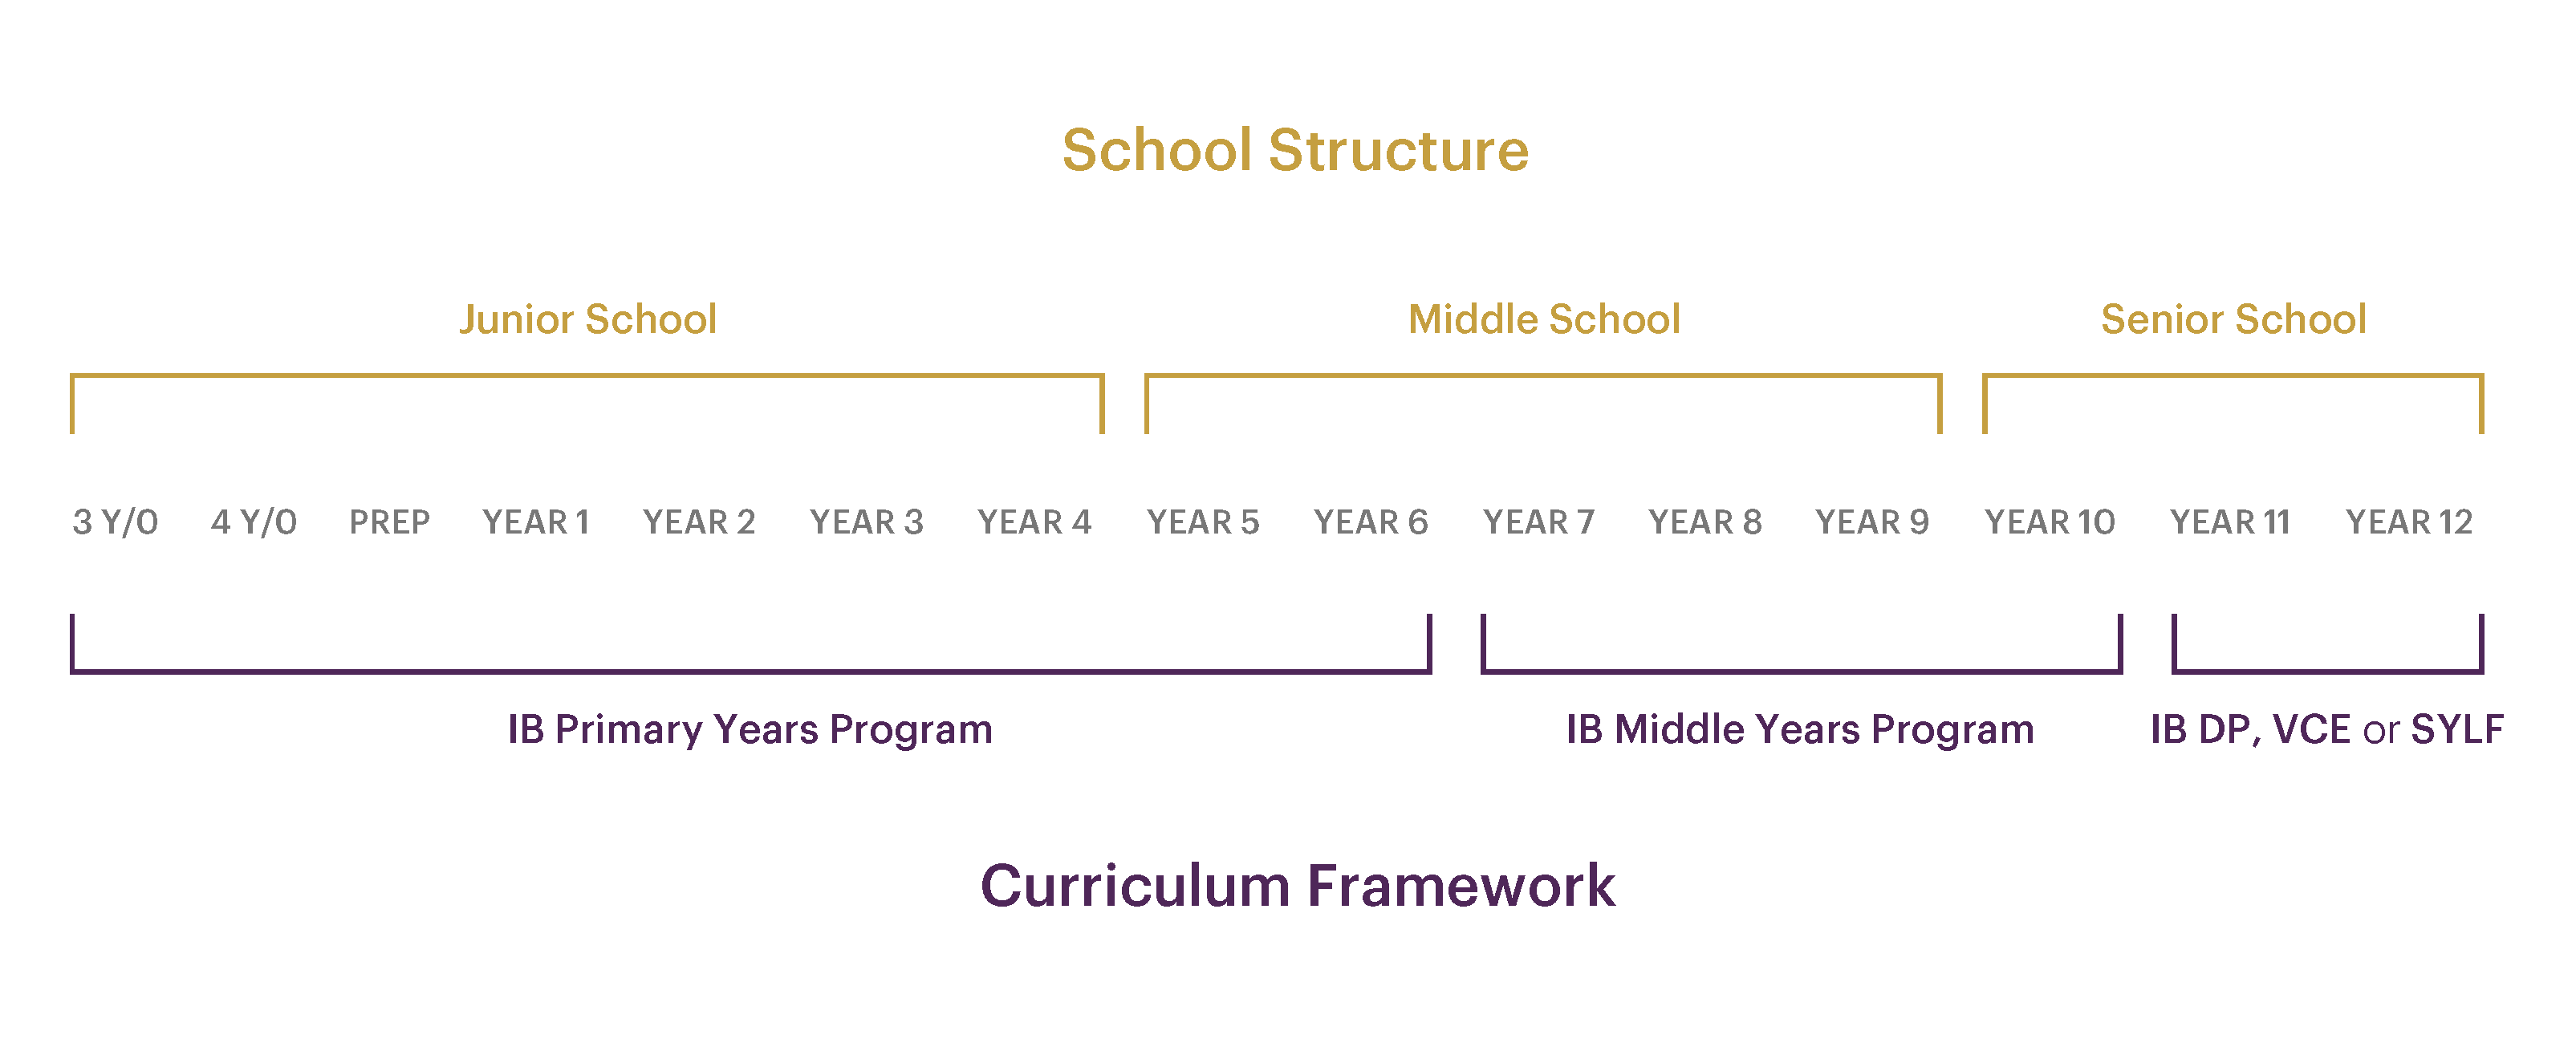 A diagram showing school curriculum over junior, middle and senior school years